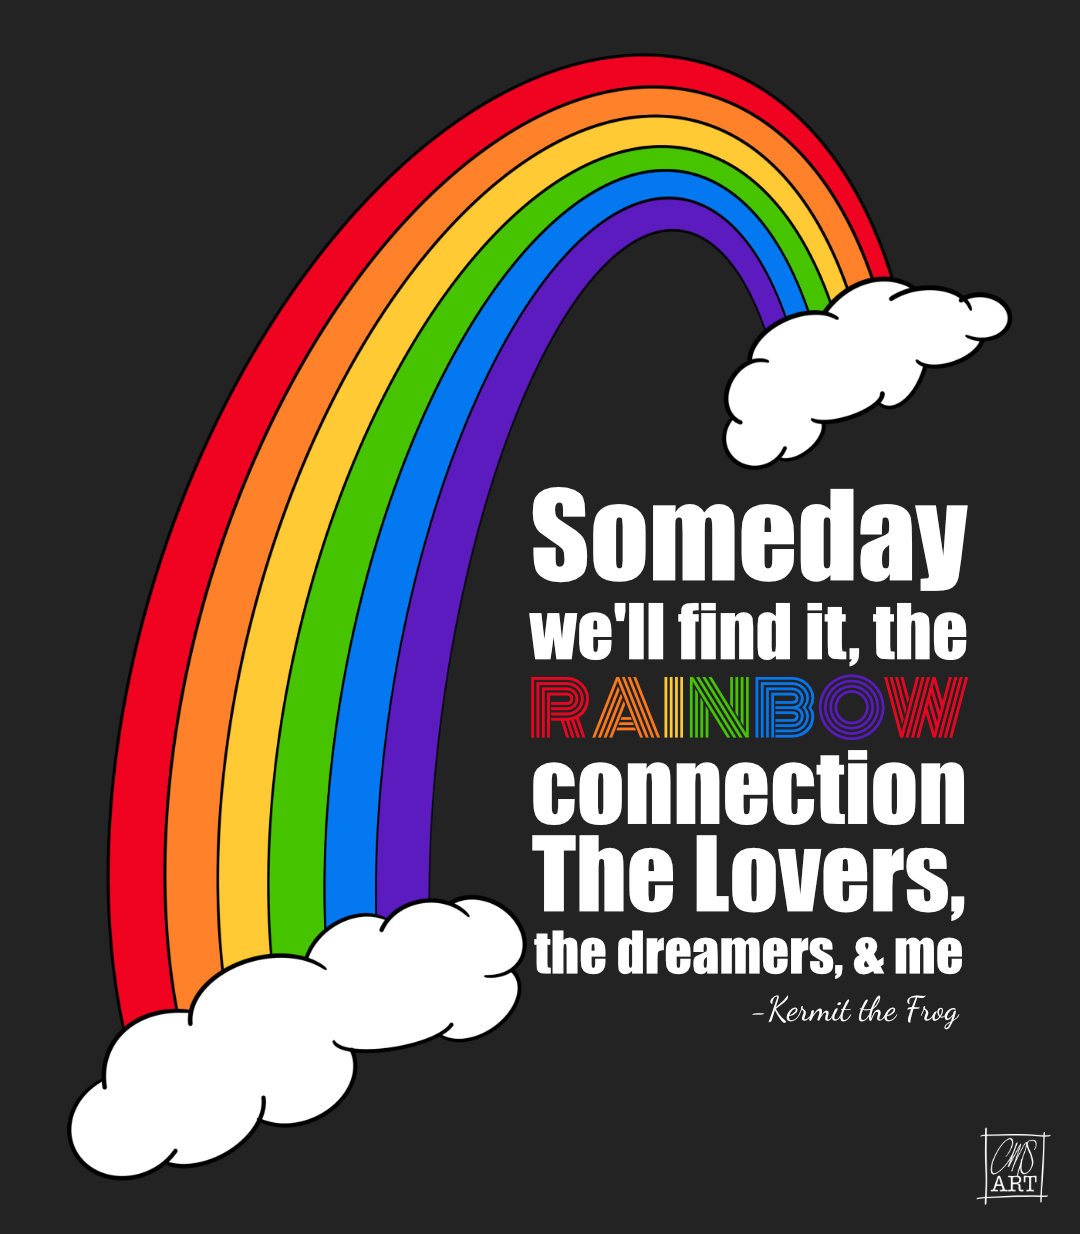 bright rainbow popping out of clouds on a dark backdrop. next to the rainbow is the quote "Someday we'll find it, the RAINBOW connection The Lovers, the dreamers, & me" ~ Kermit the Frog